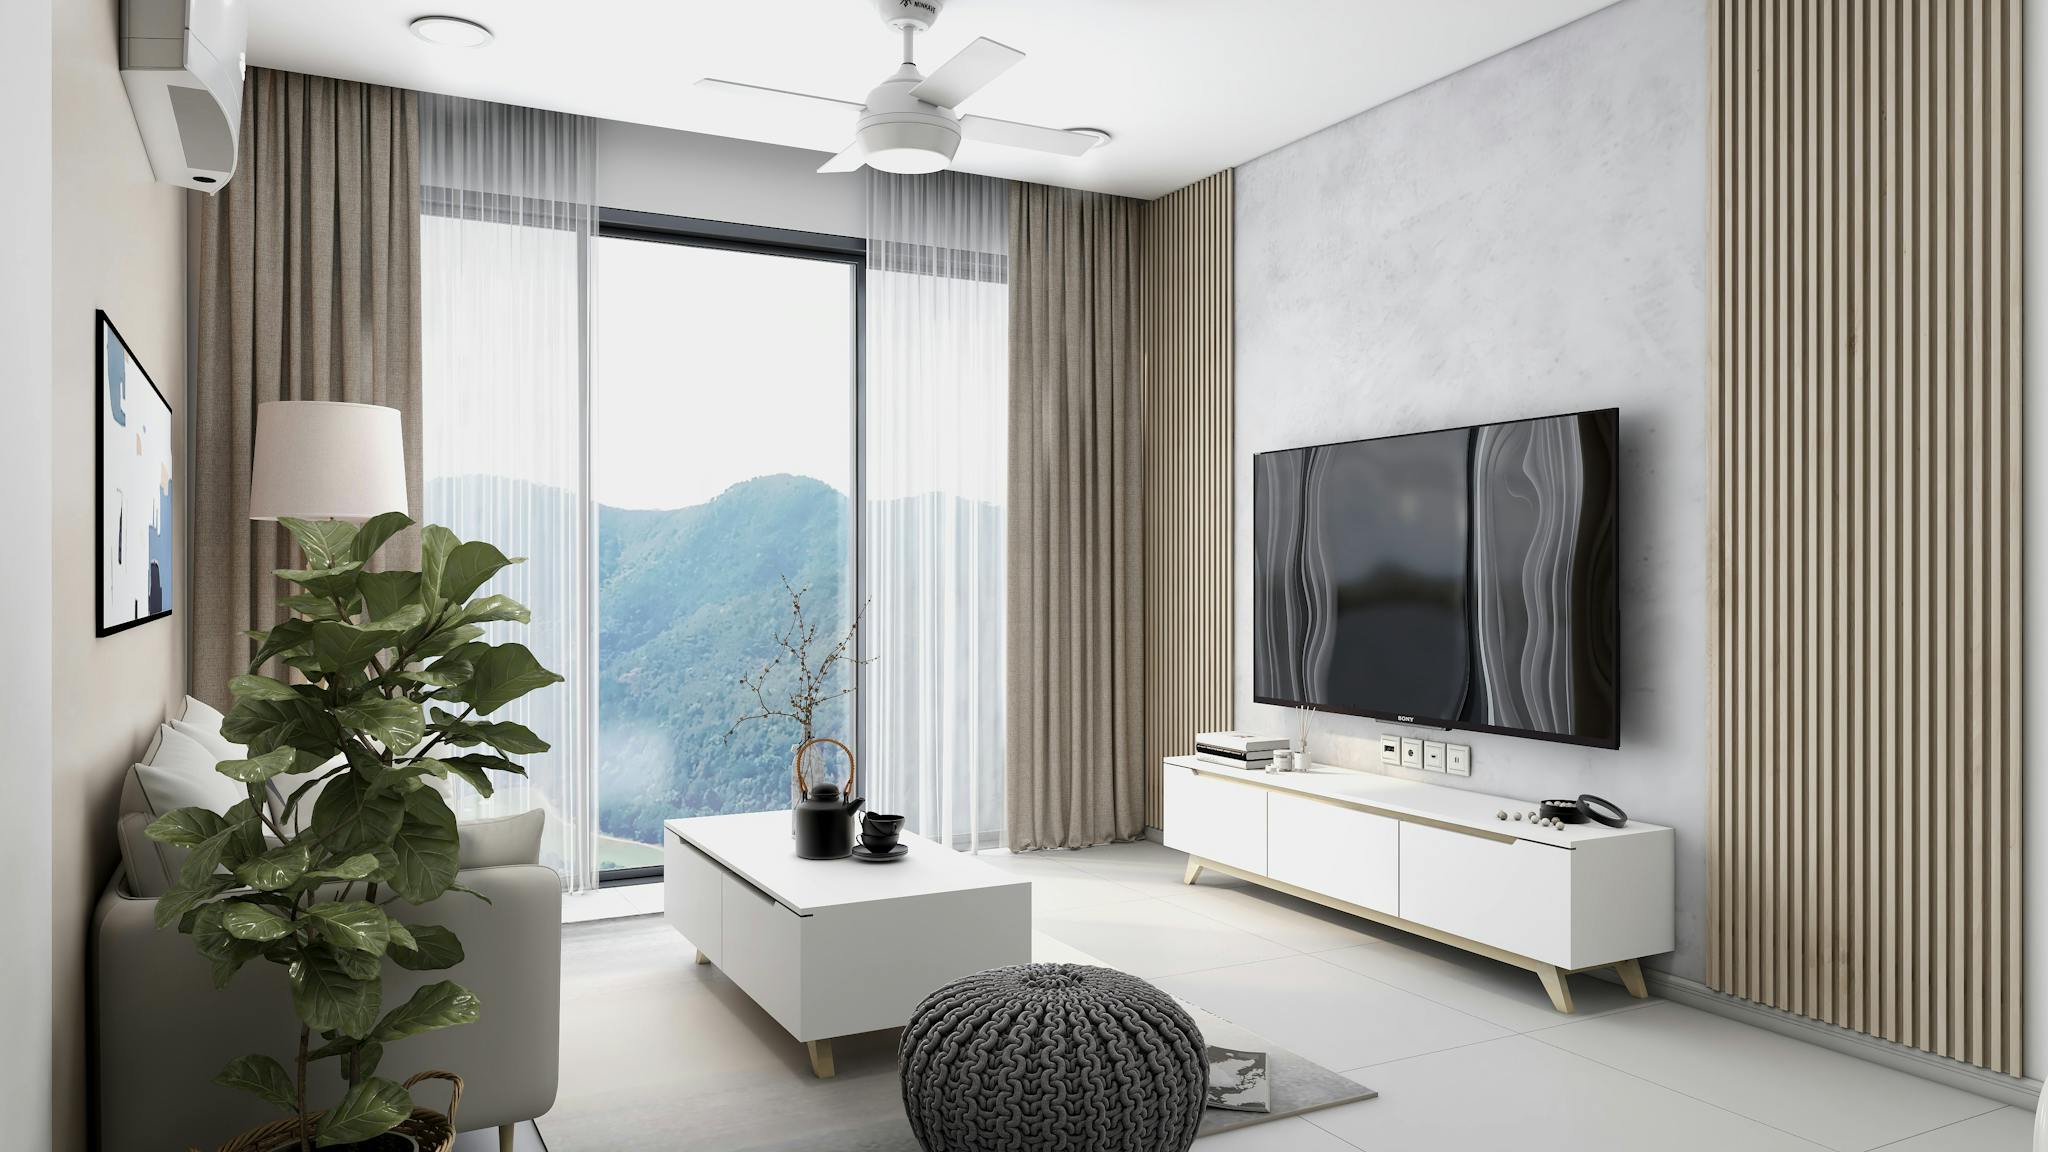 10 Affordable Ways to Achieve A Muji Interior Design Style for Your Malaysian Home (2023)